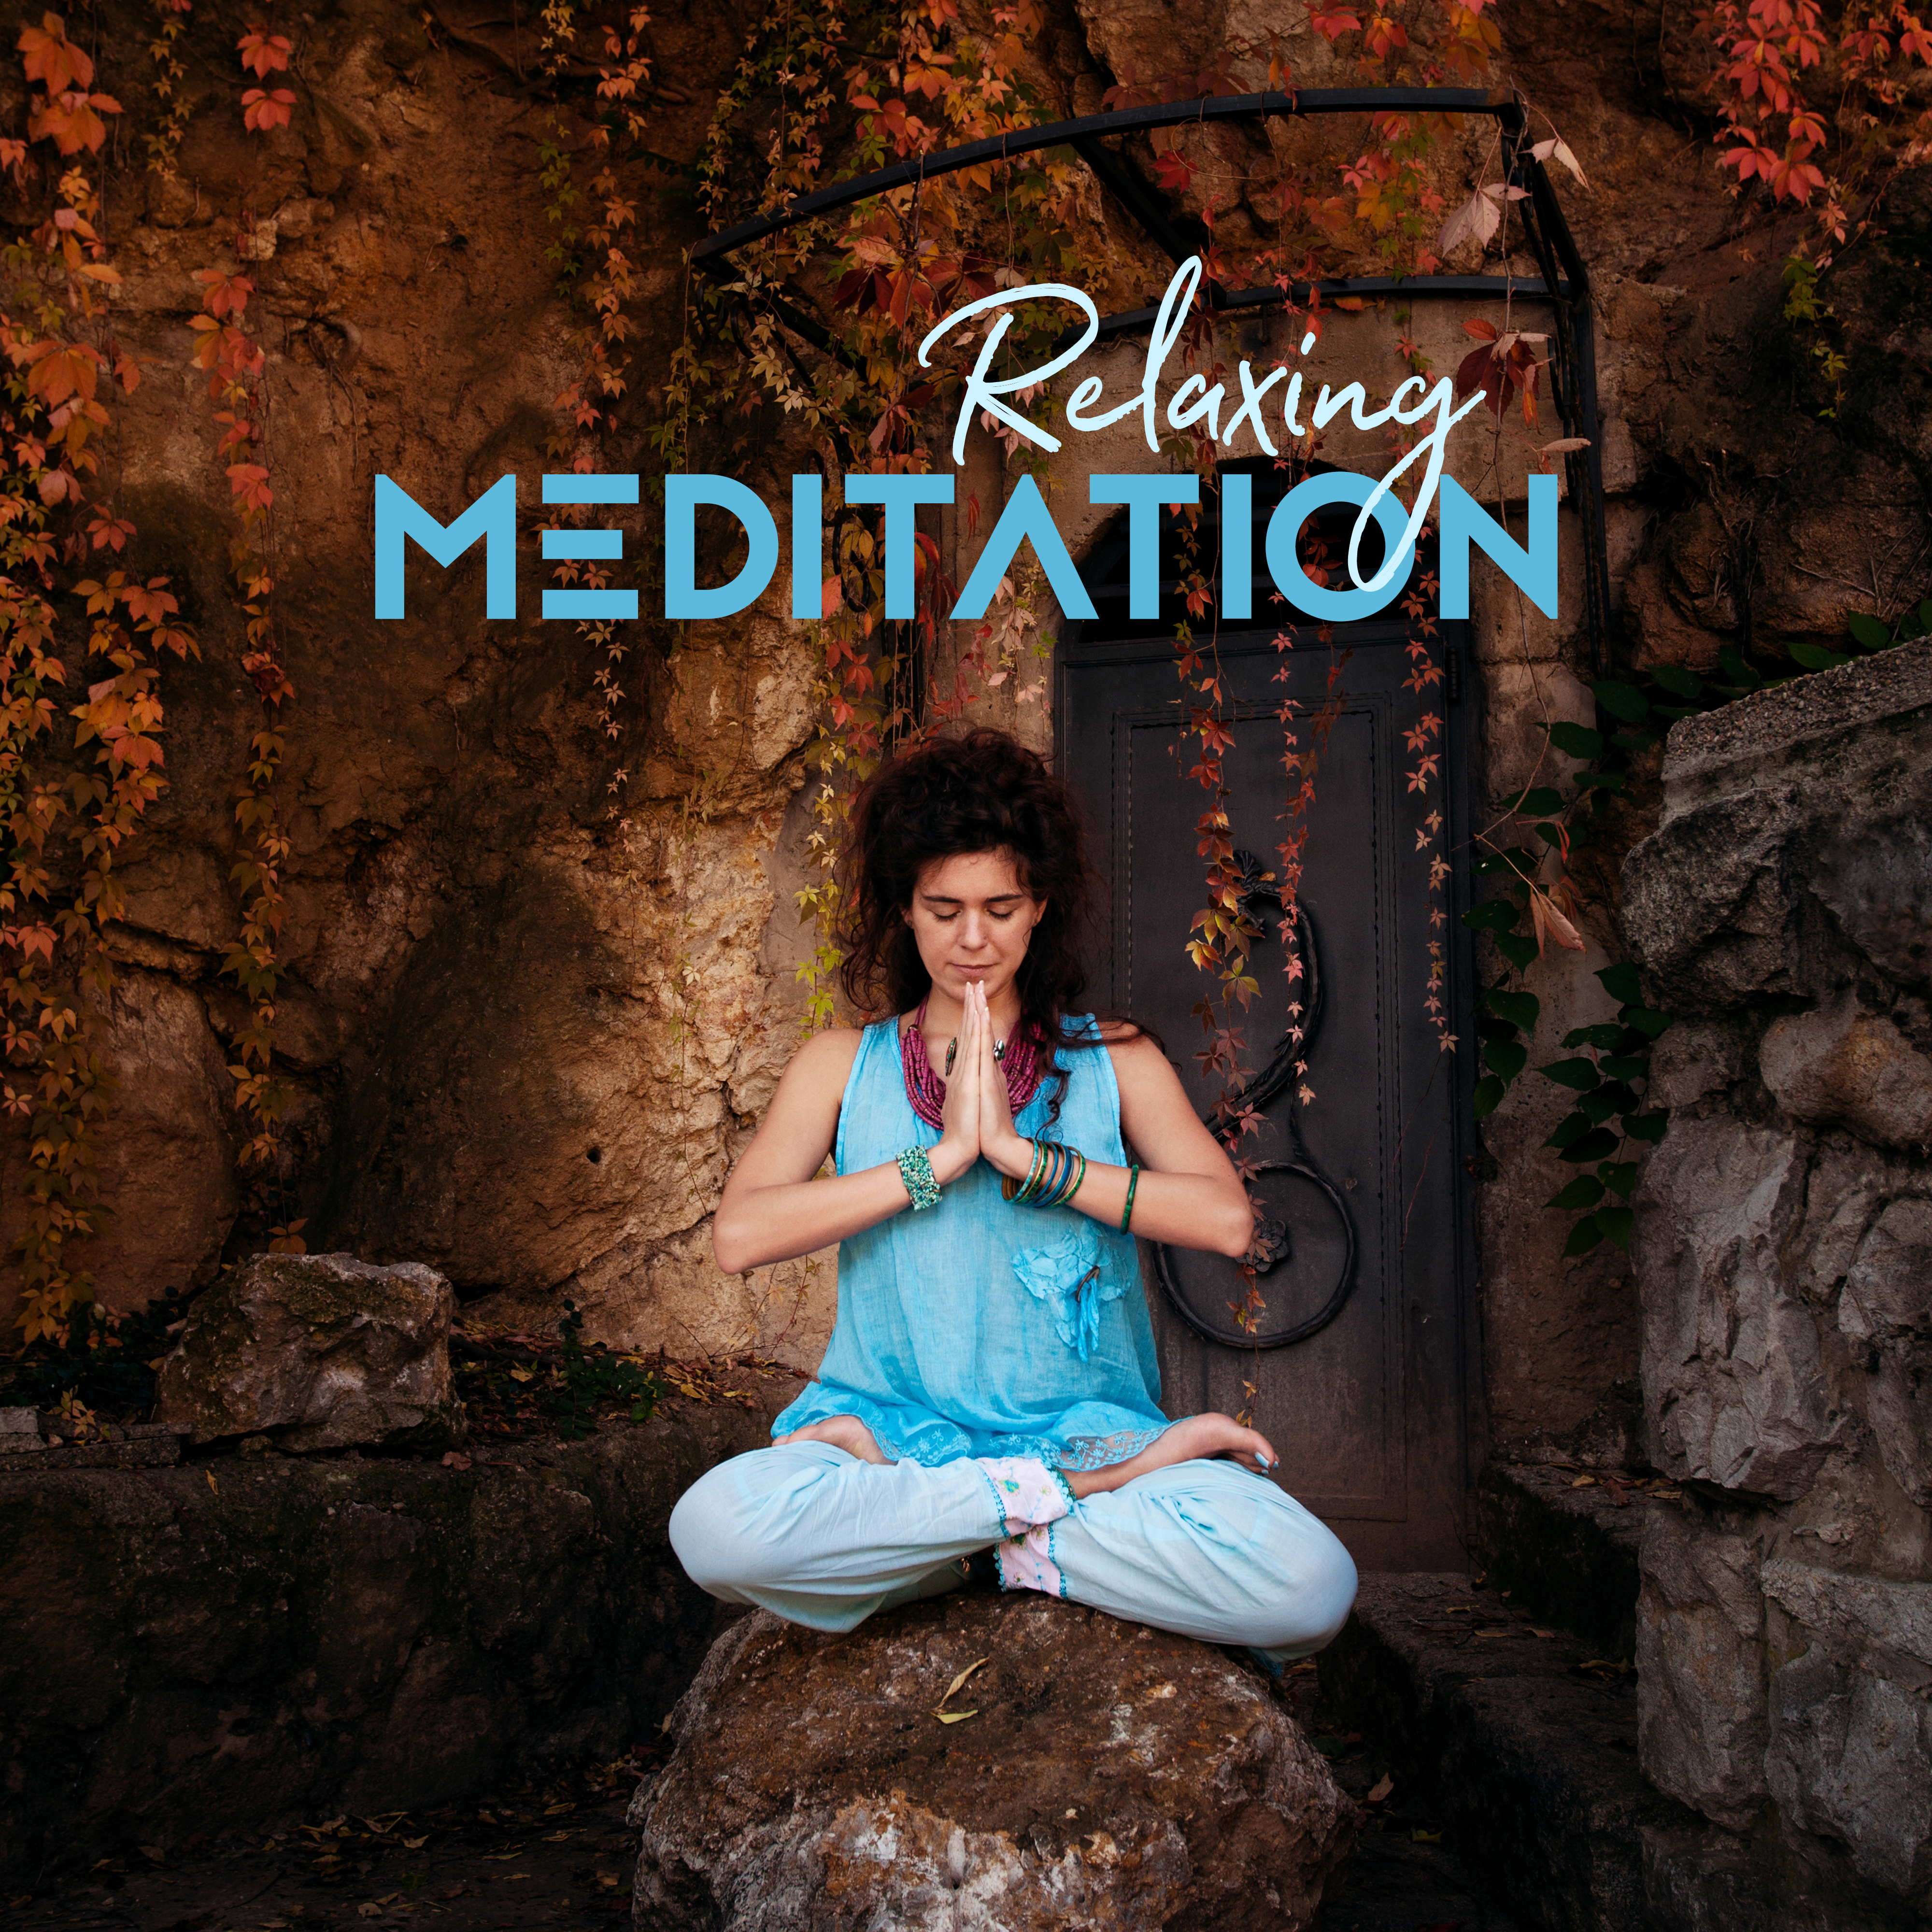 Relaxing Meditation: Releasing from Bad Emotions and Feelings, Meditation Music